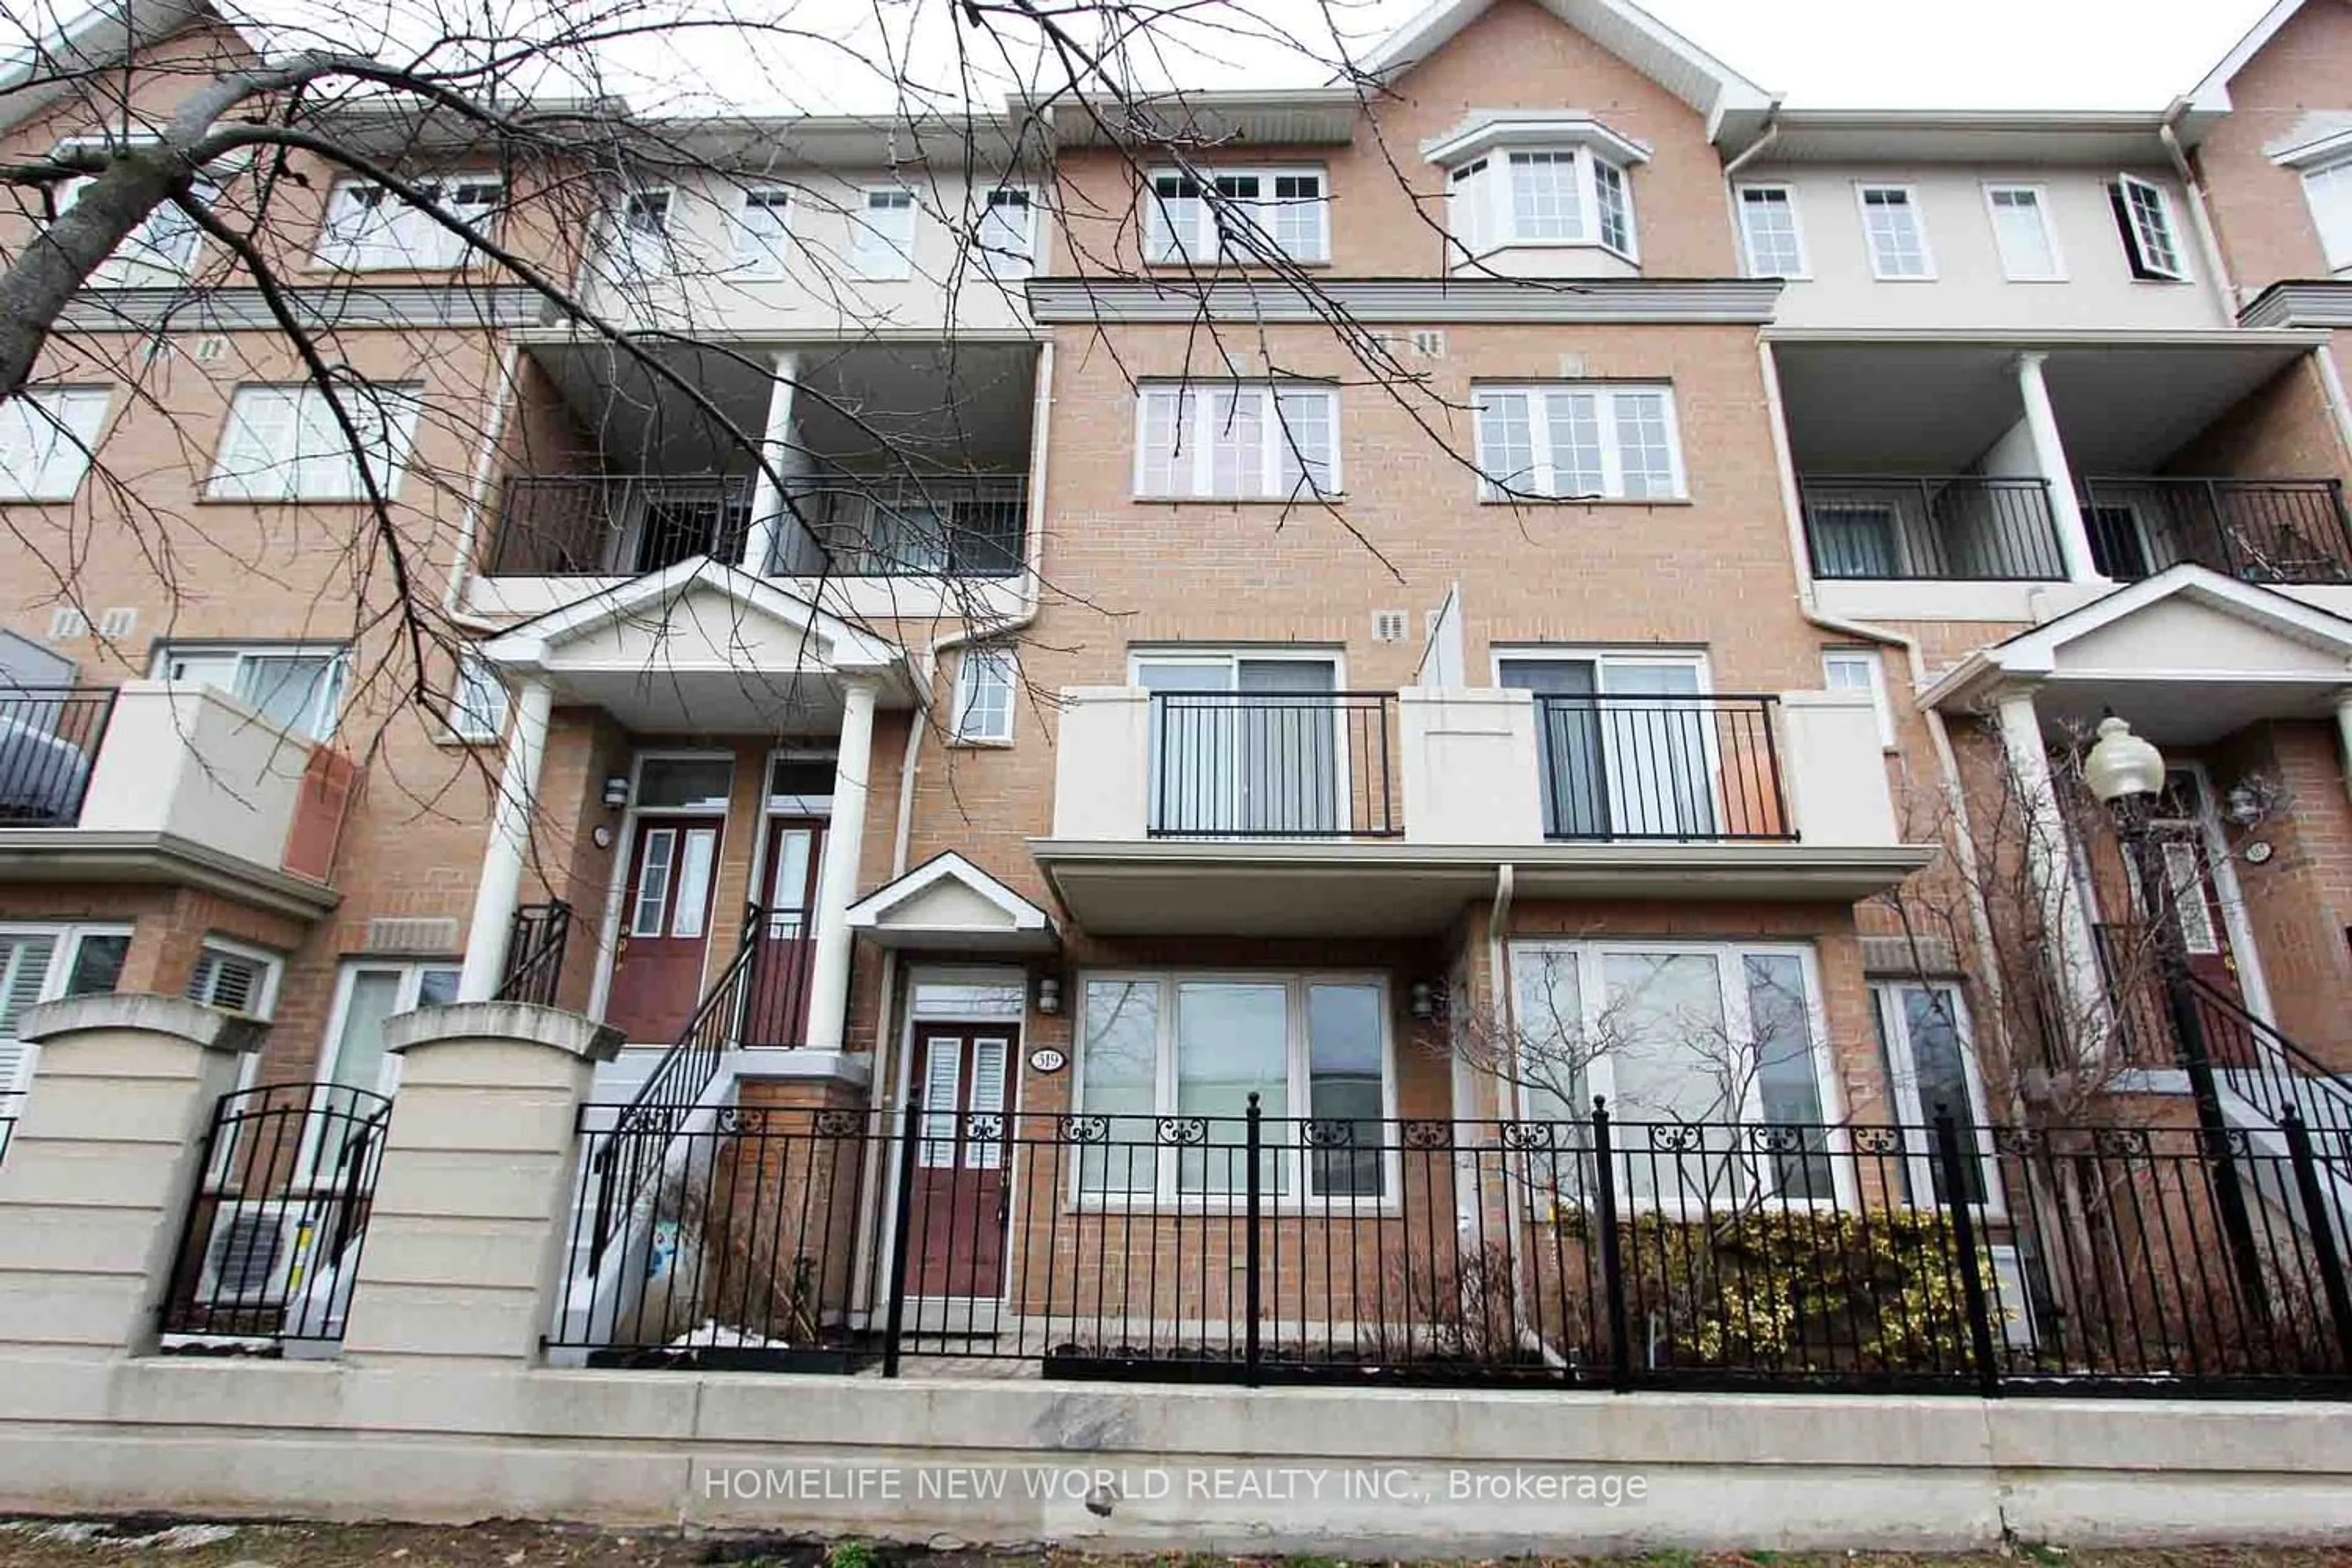 A pic from exterior of the house or condo for 319 Grandview Way, Toronto Ontario M2N 6V3